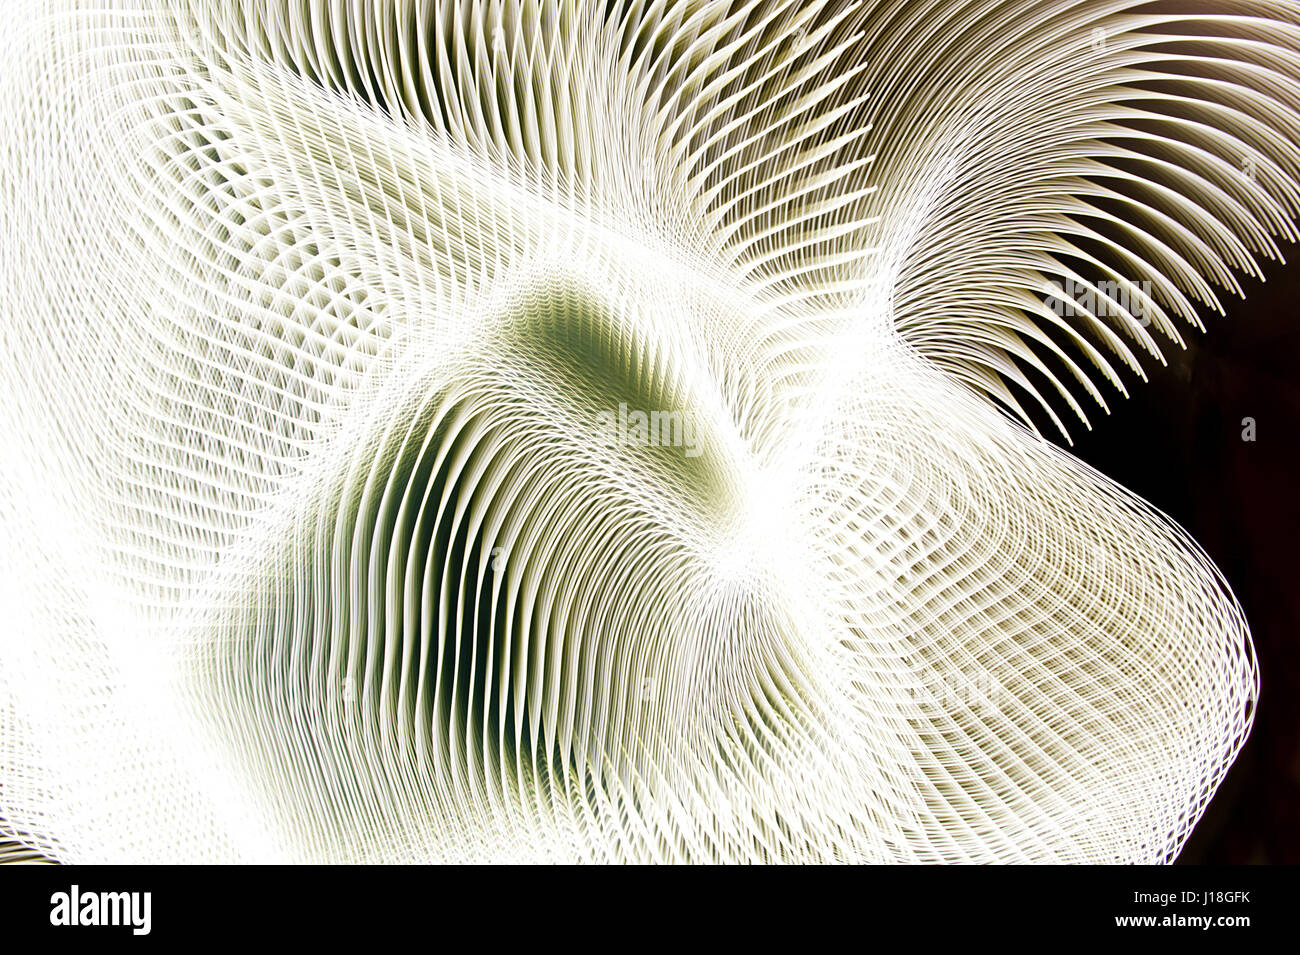 A background of an illustrated abstract white pattern Stock Photo